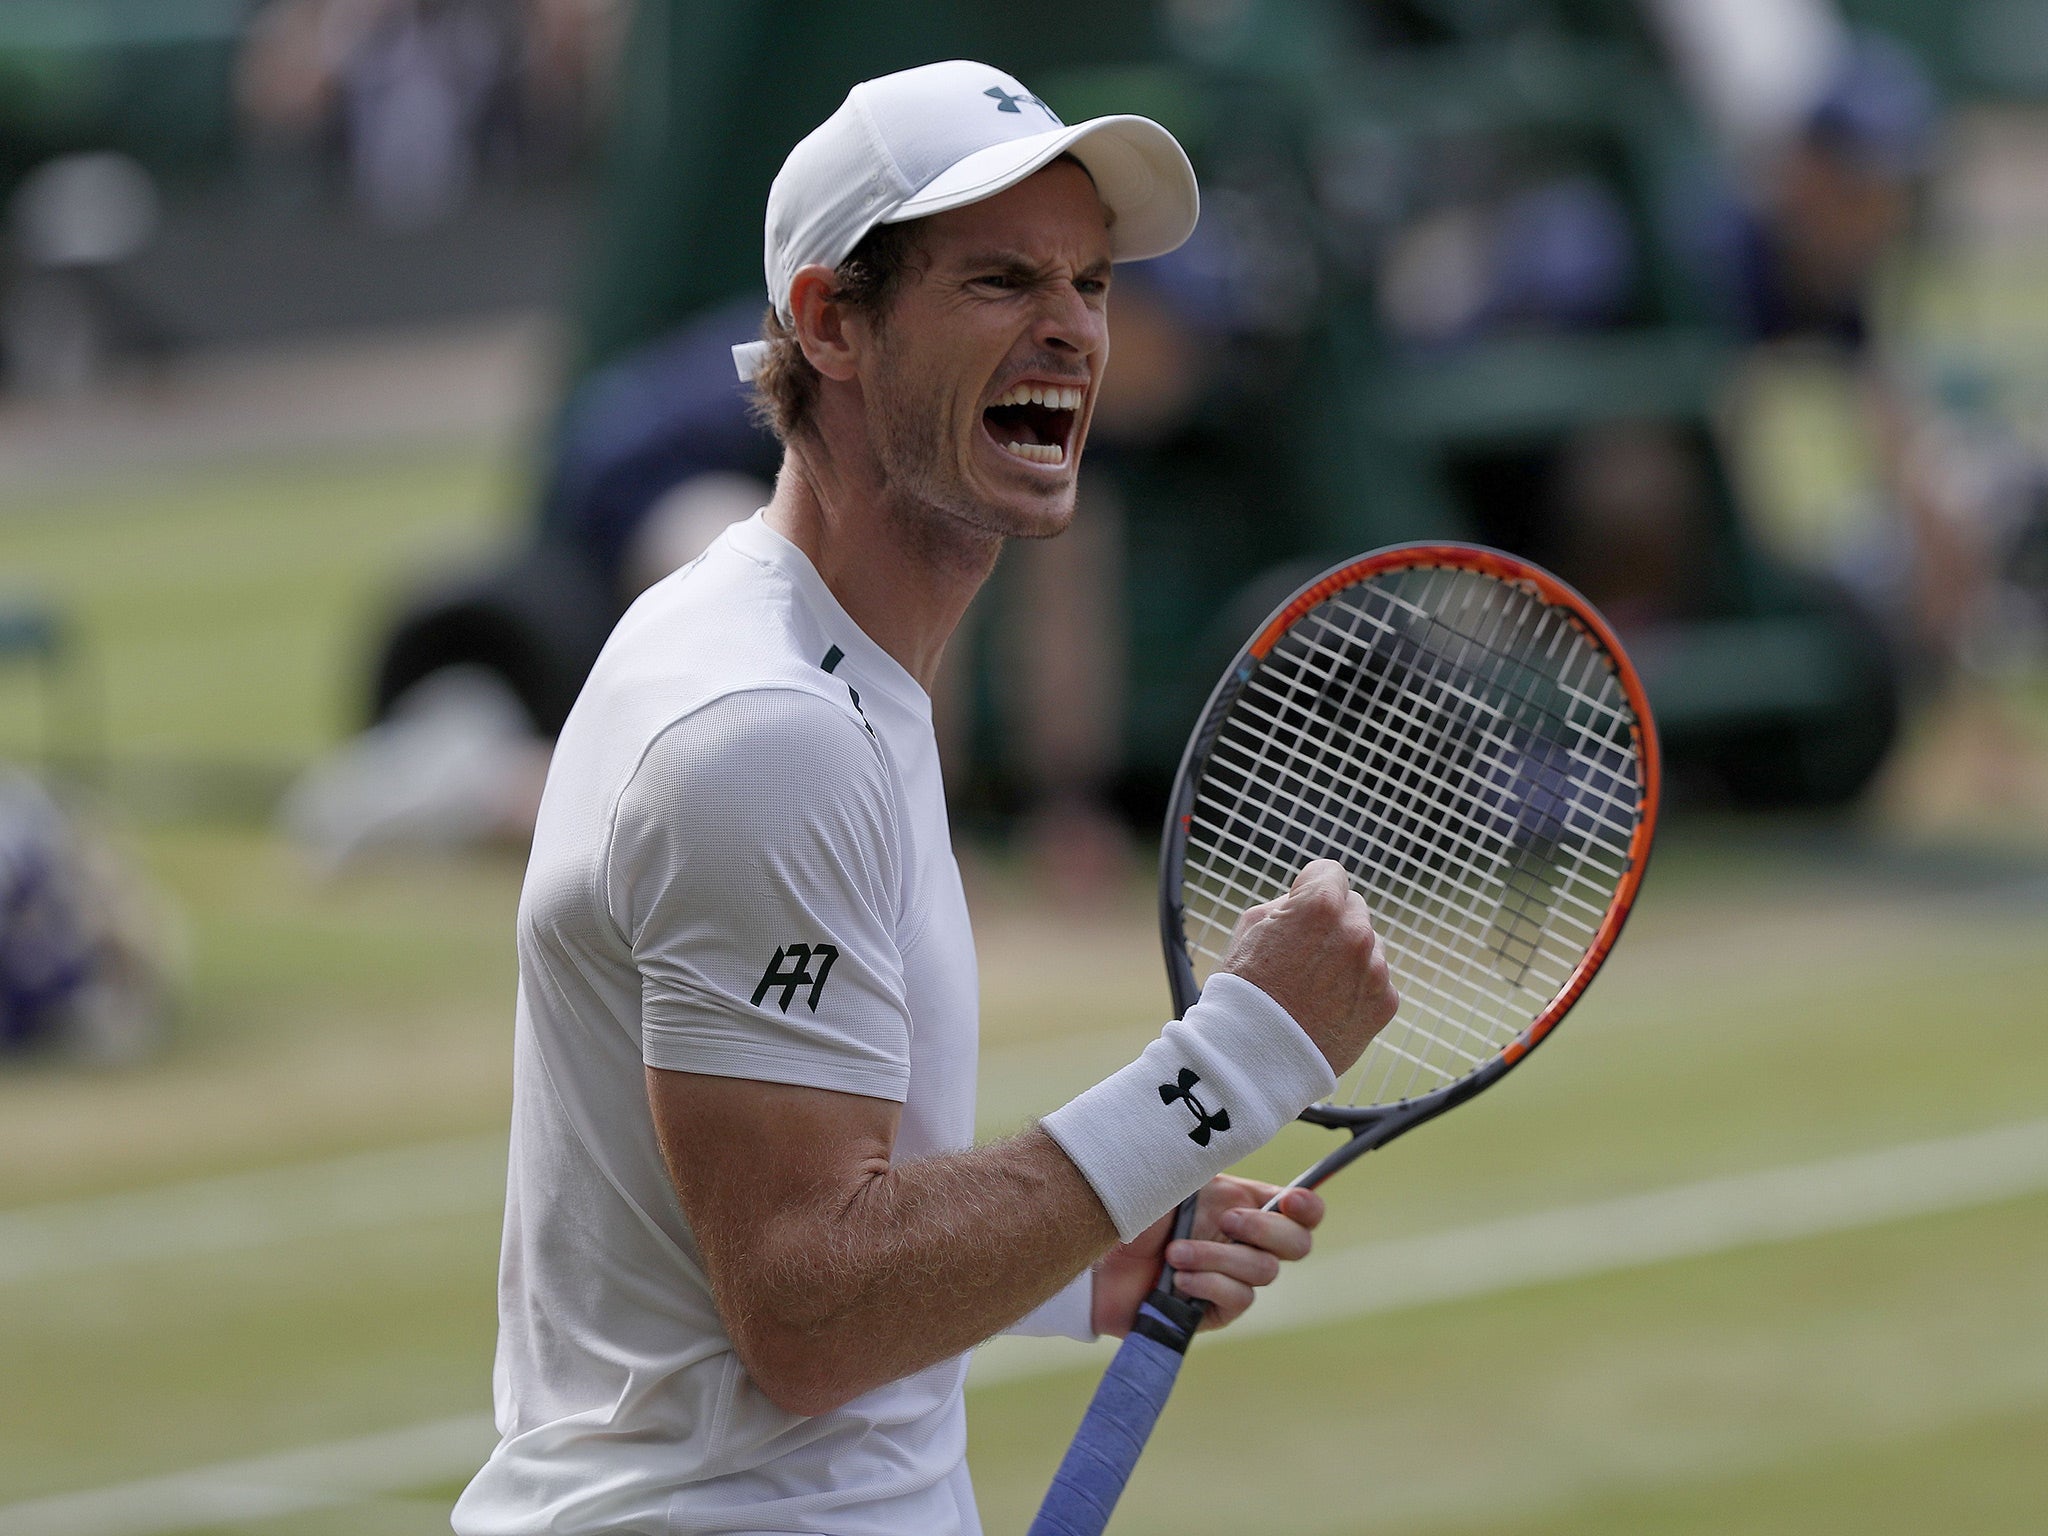 Andy Murray beat Benoit Paire to book his place in the quarter-finals